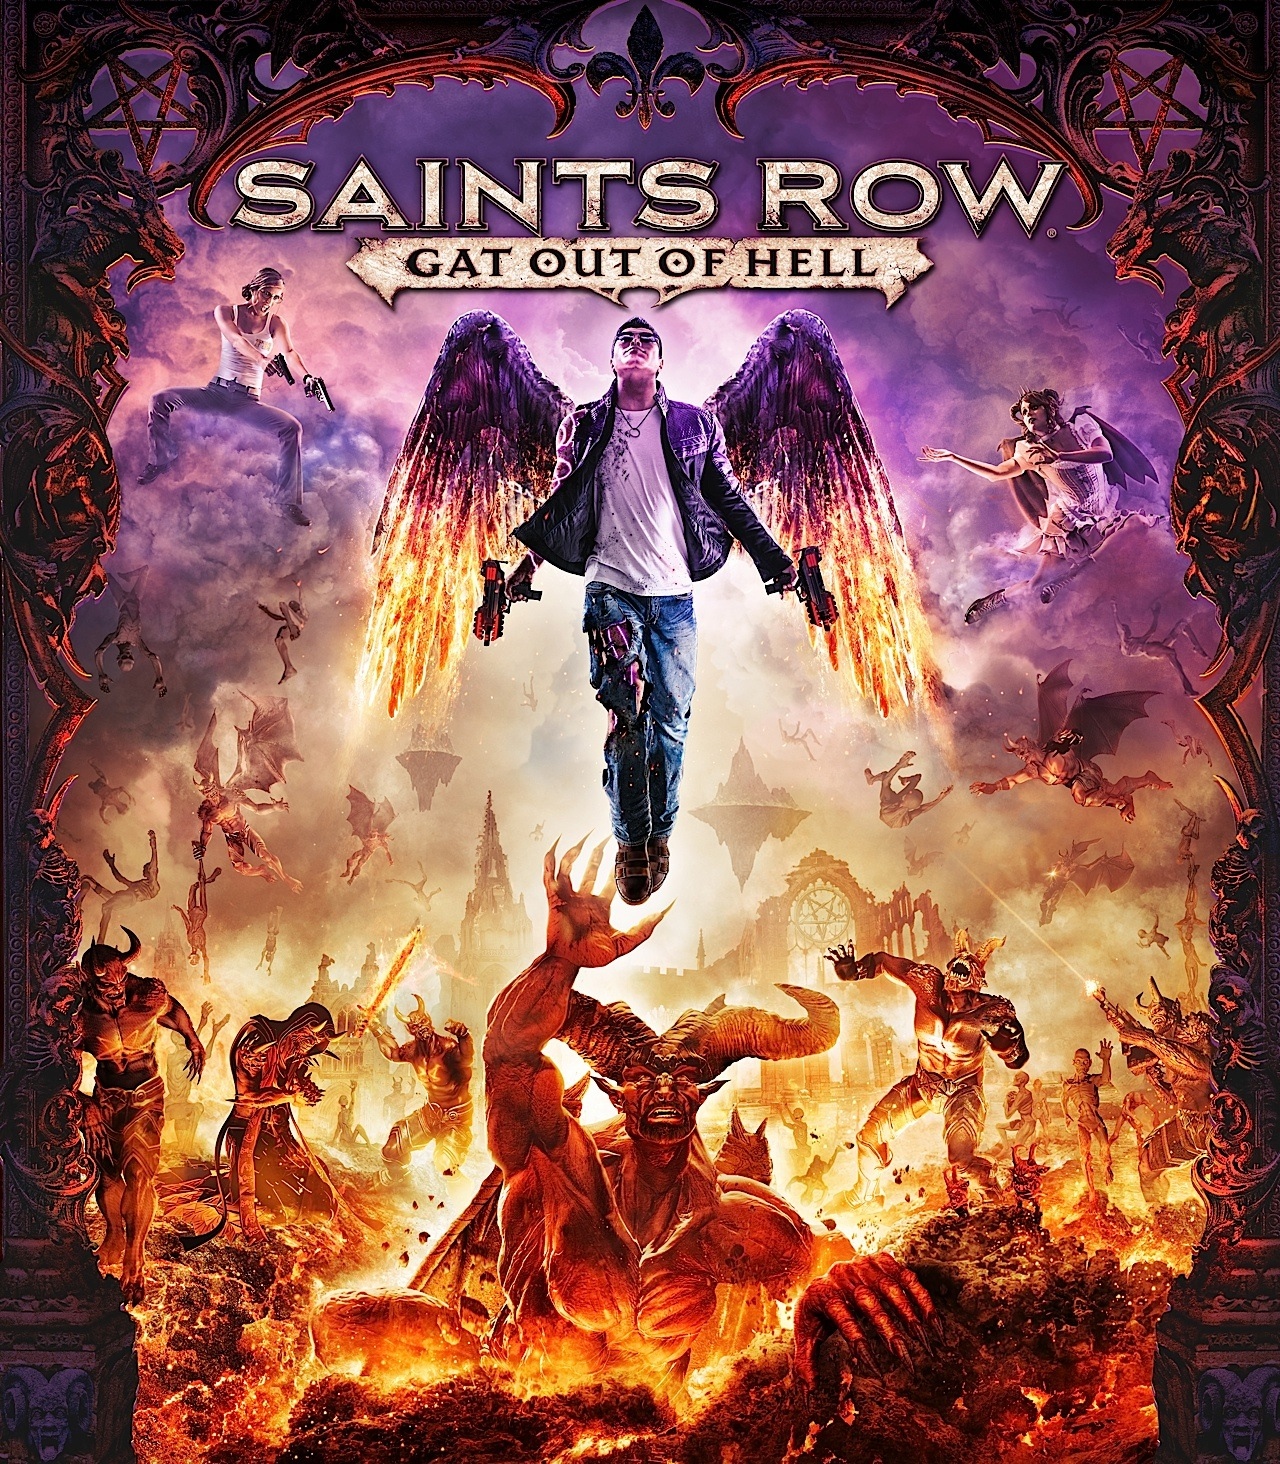 Saints row get out of hell steam фото 1